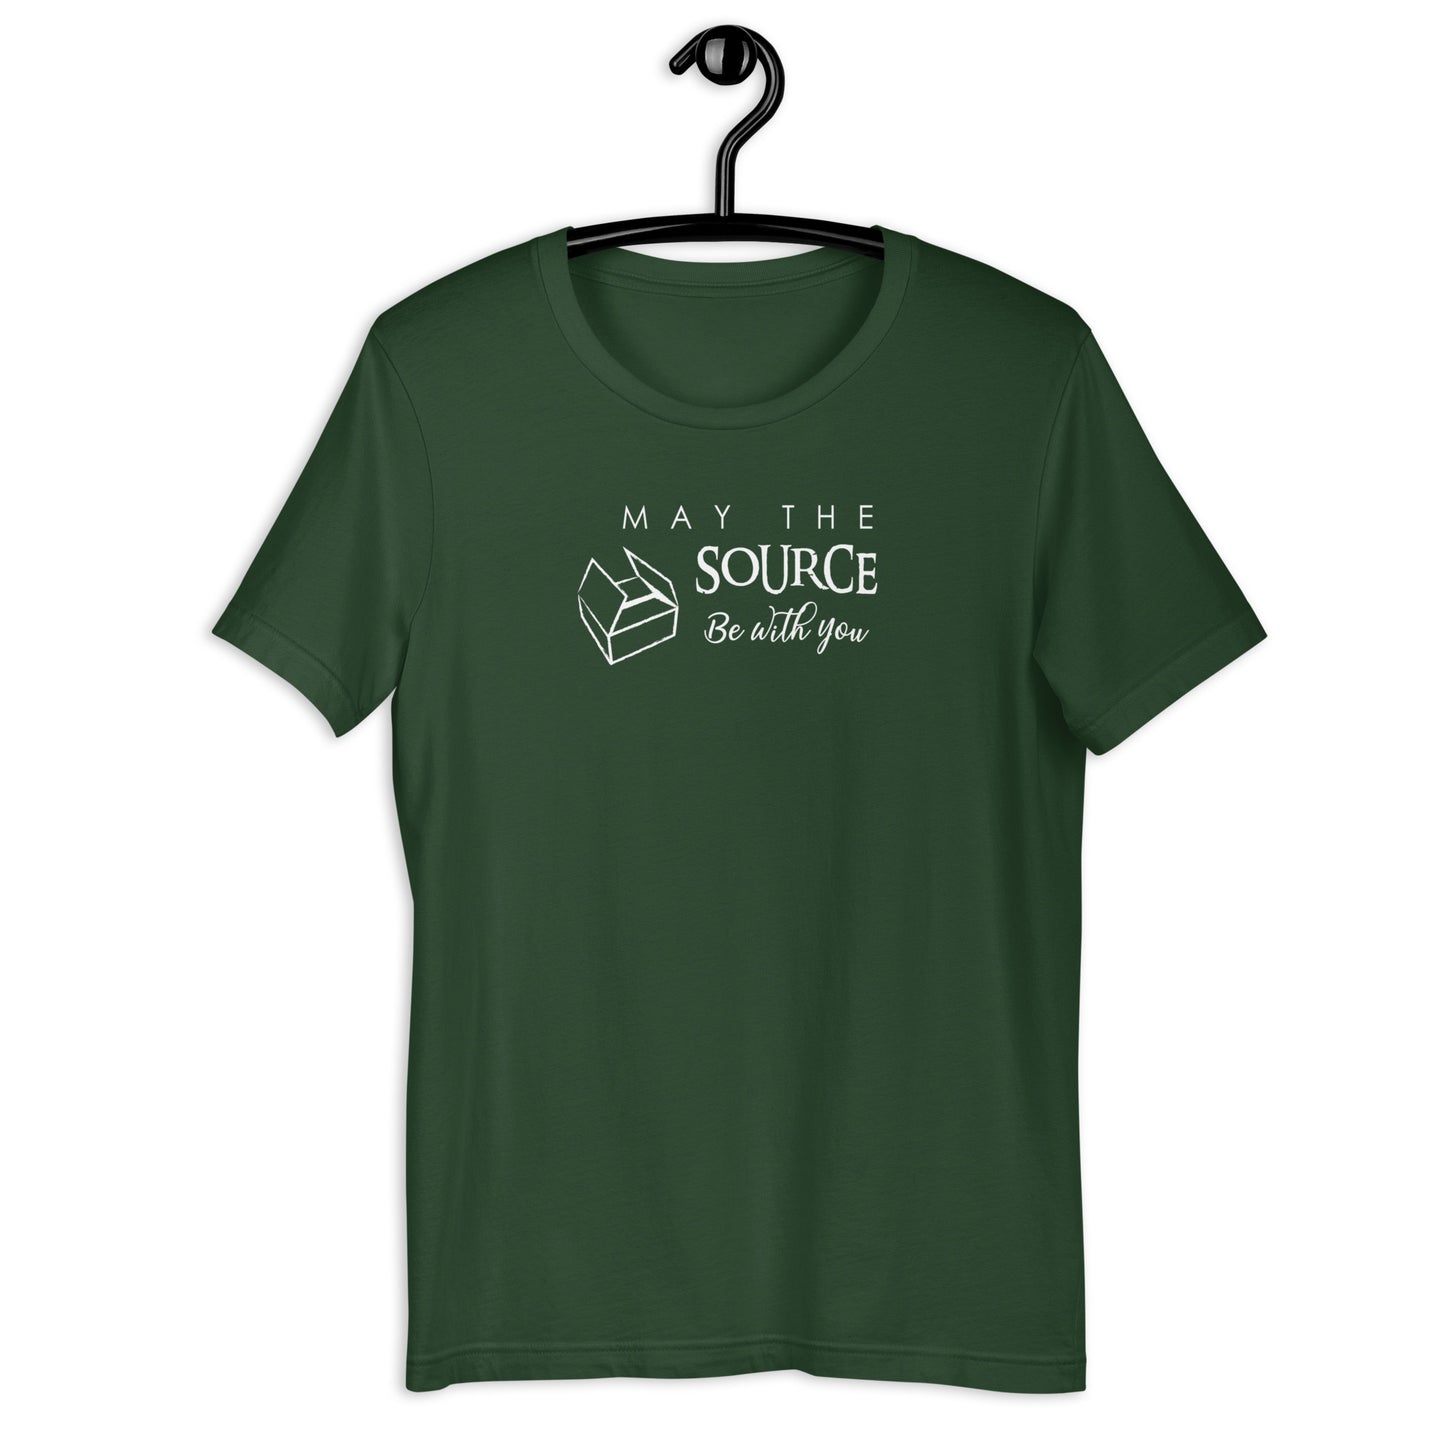 May the source be with you - Nosework - Unisex t-shirt